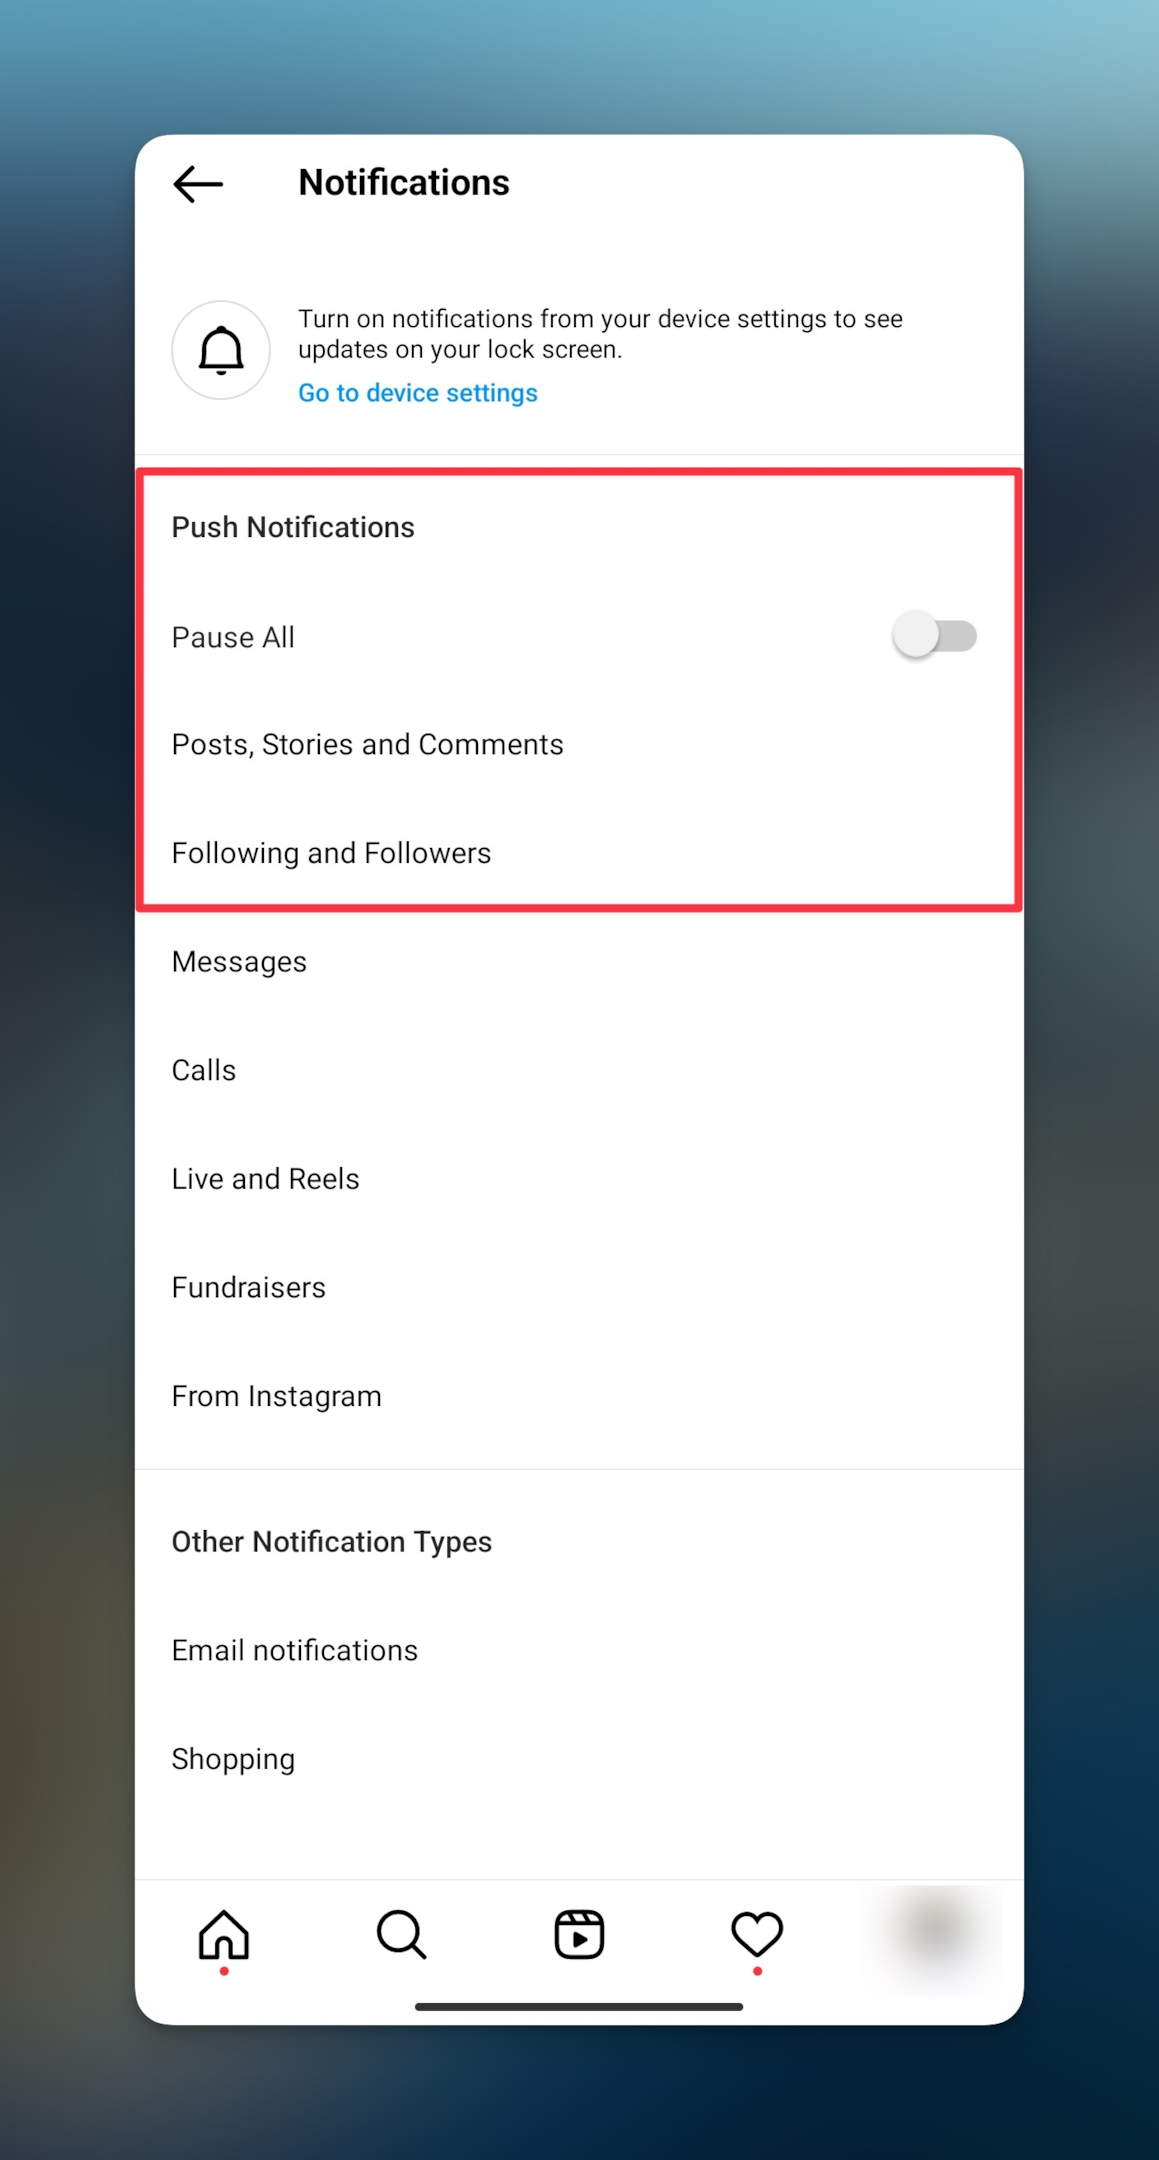 Remote.tools show how to configure Pause settings in Instagram app for Android